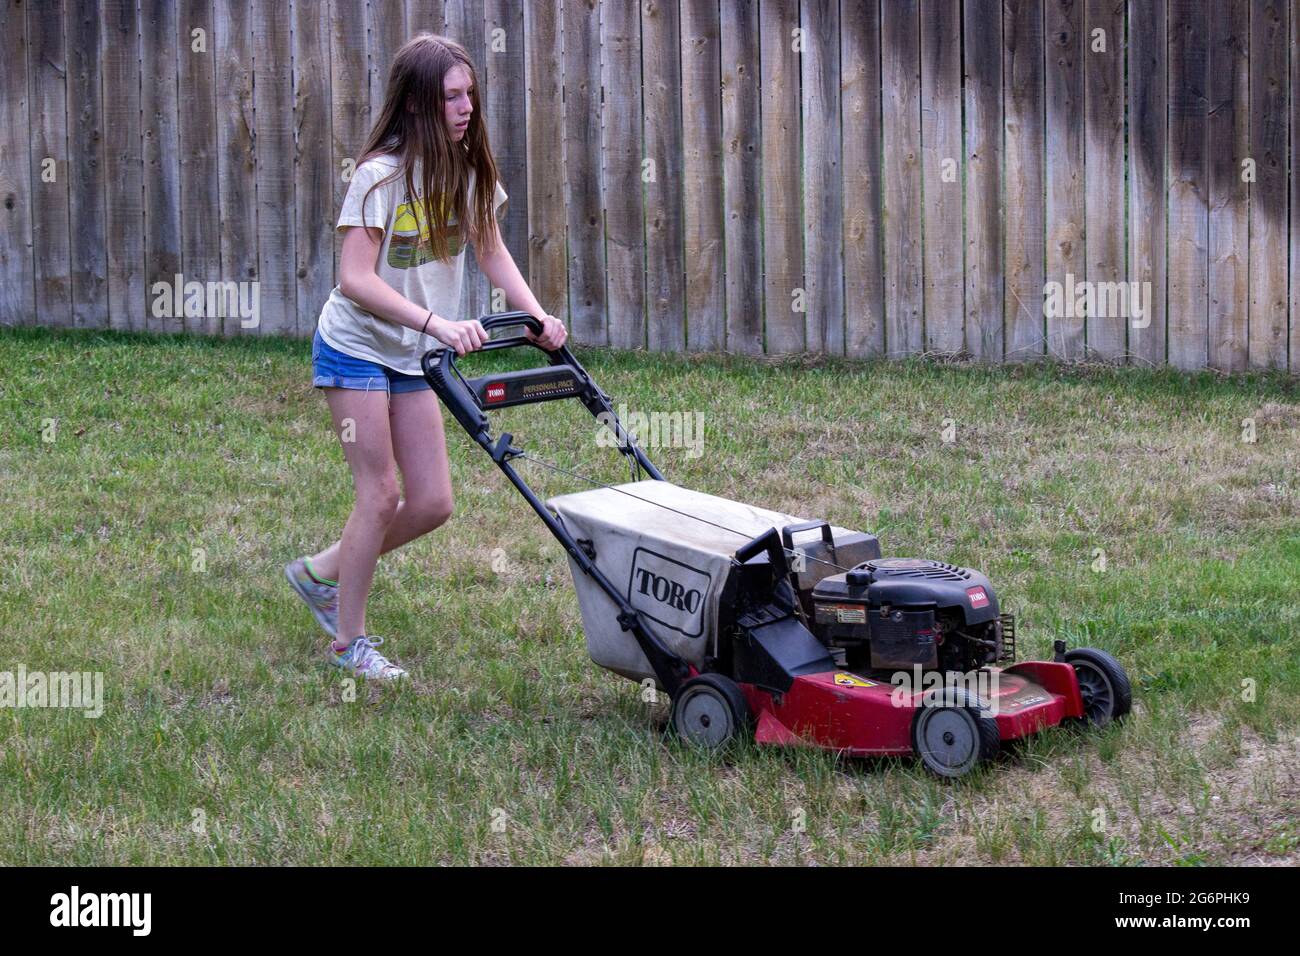 A groundskeeper mowing with a large toro mower Stock Photo - Alamy